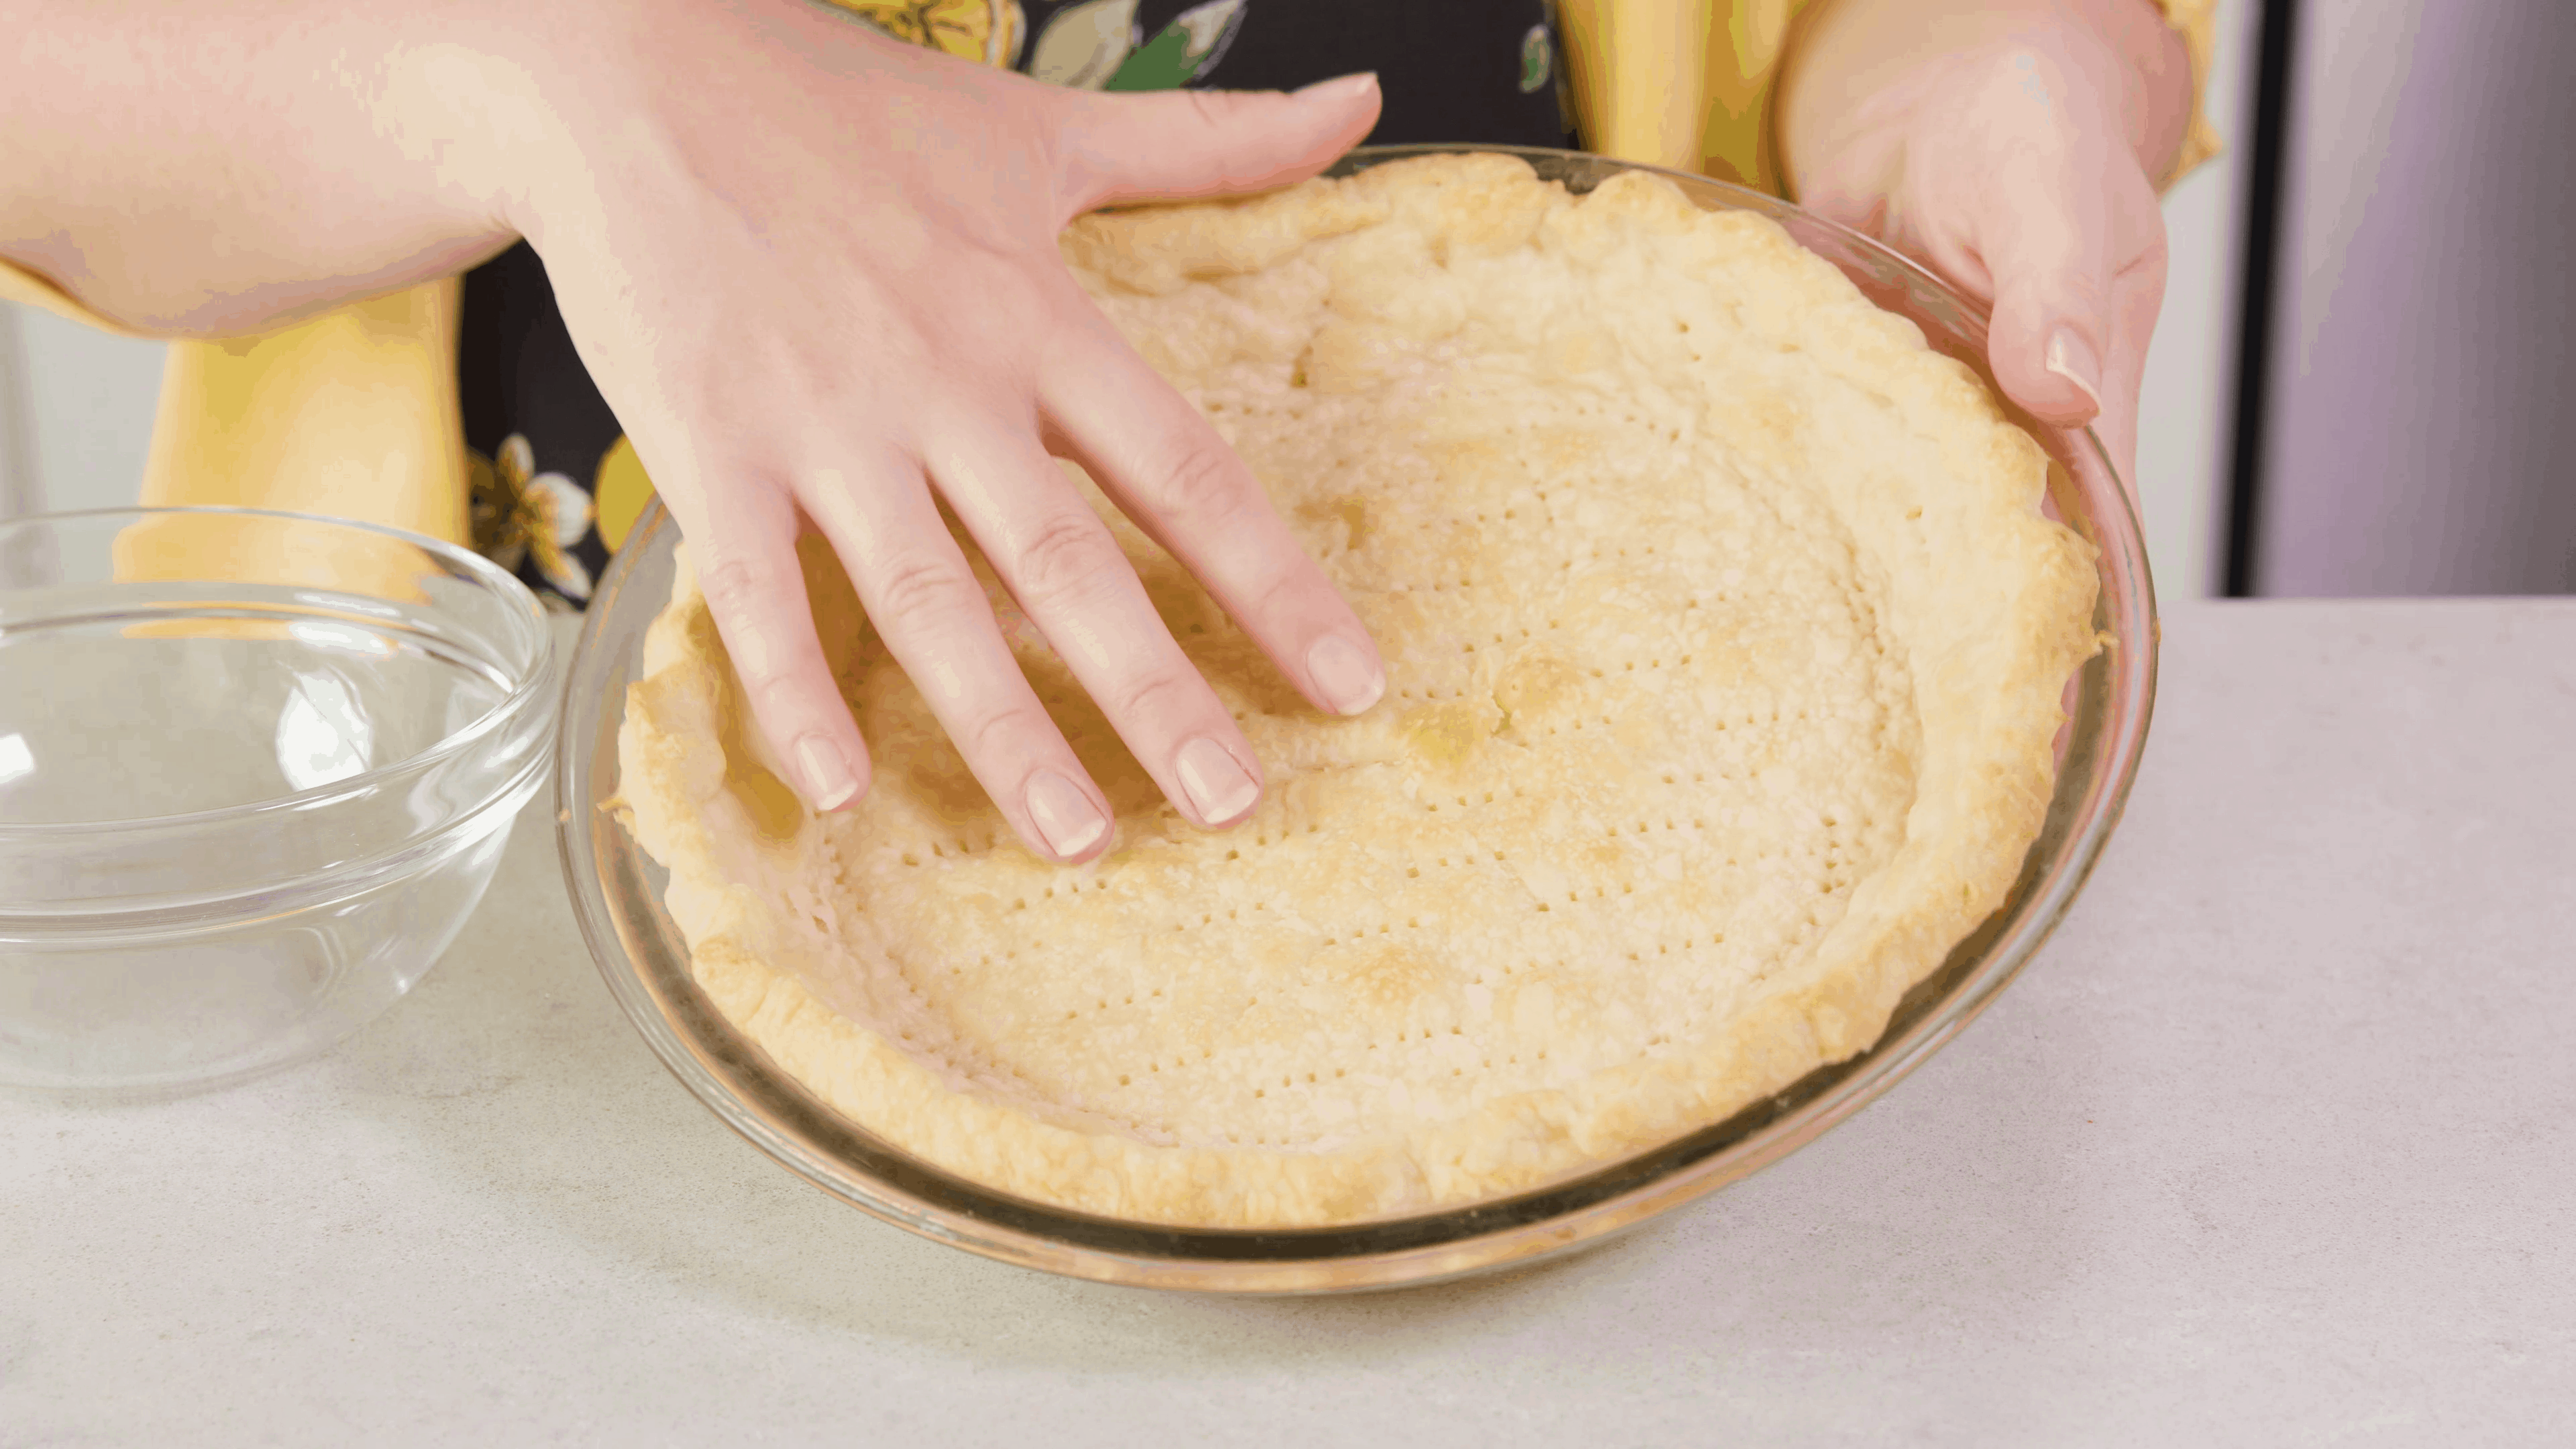 Angled view of pre-prepared pie crust in pie plate tilted on countertop.